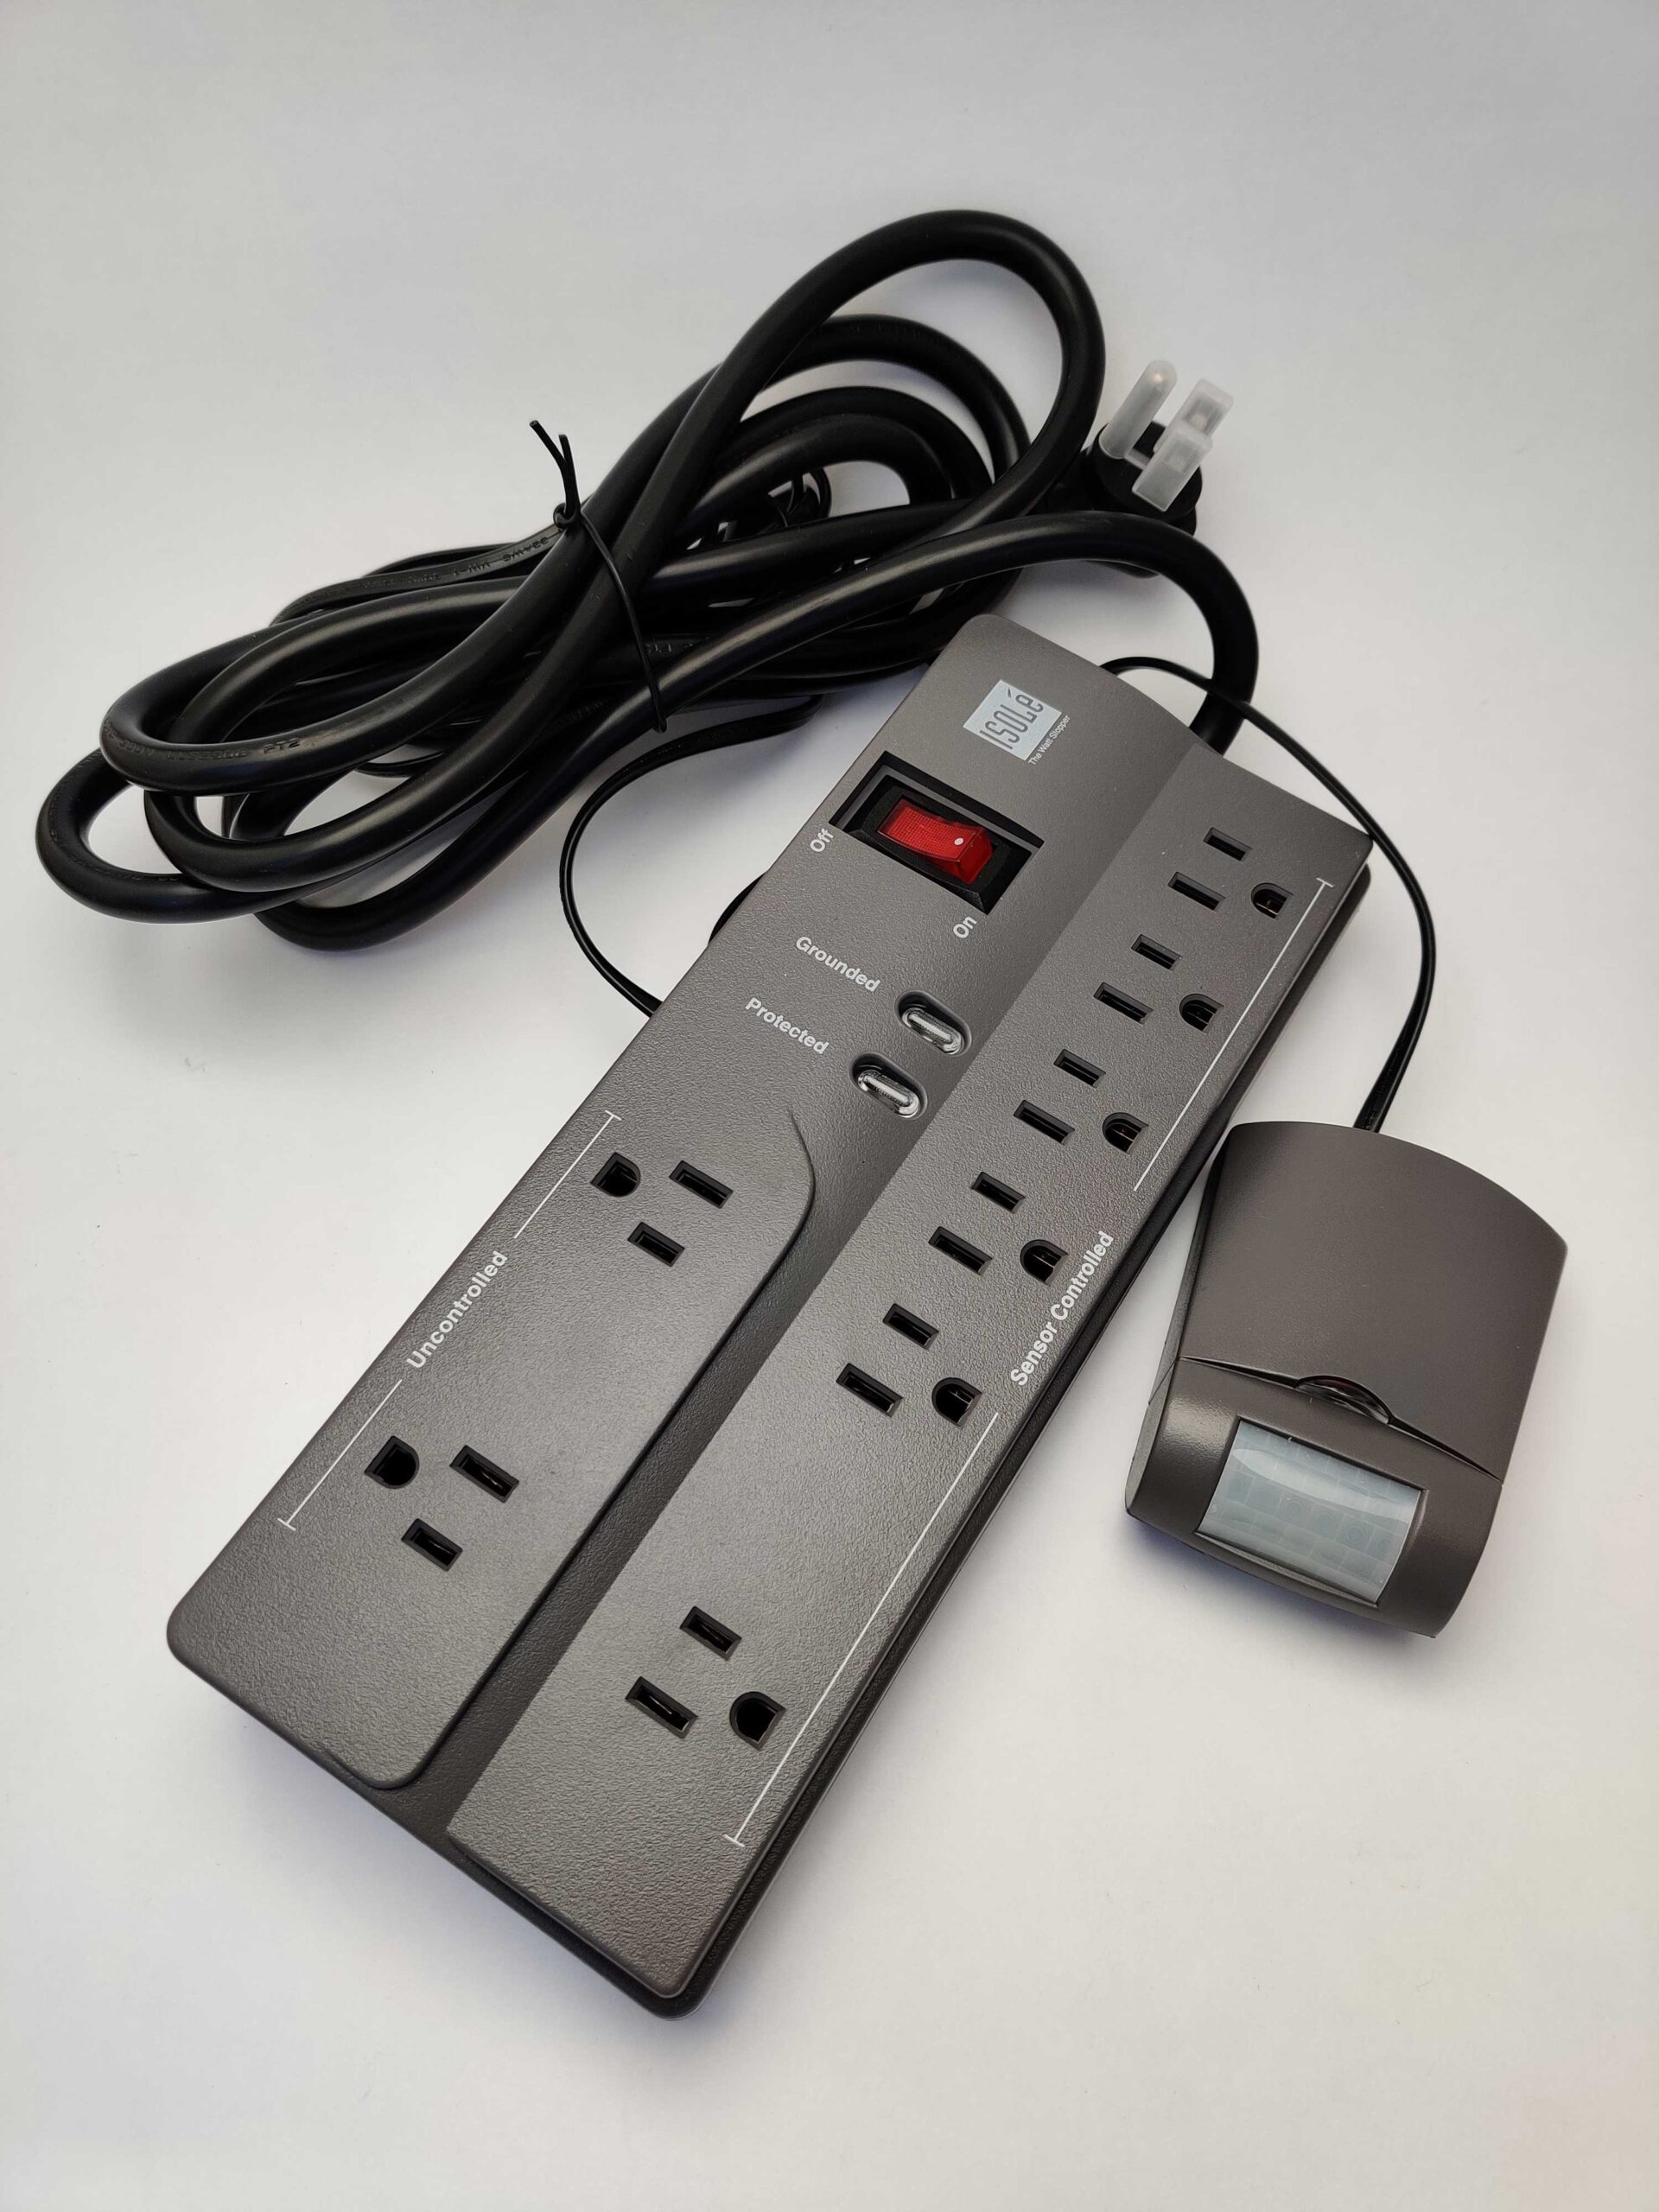 Legrand-Isole-IPD-3050 power strip